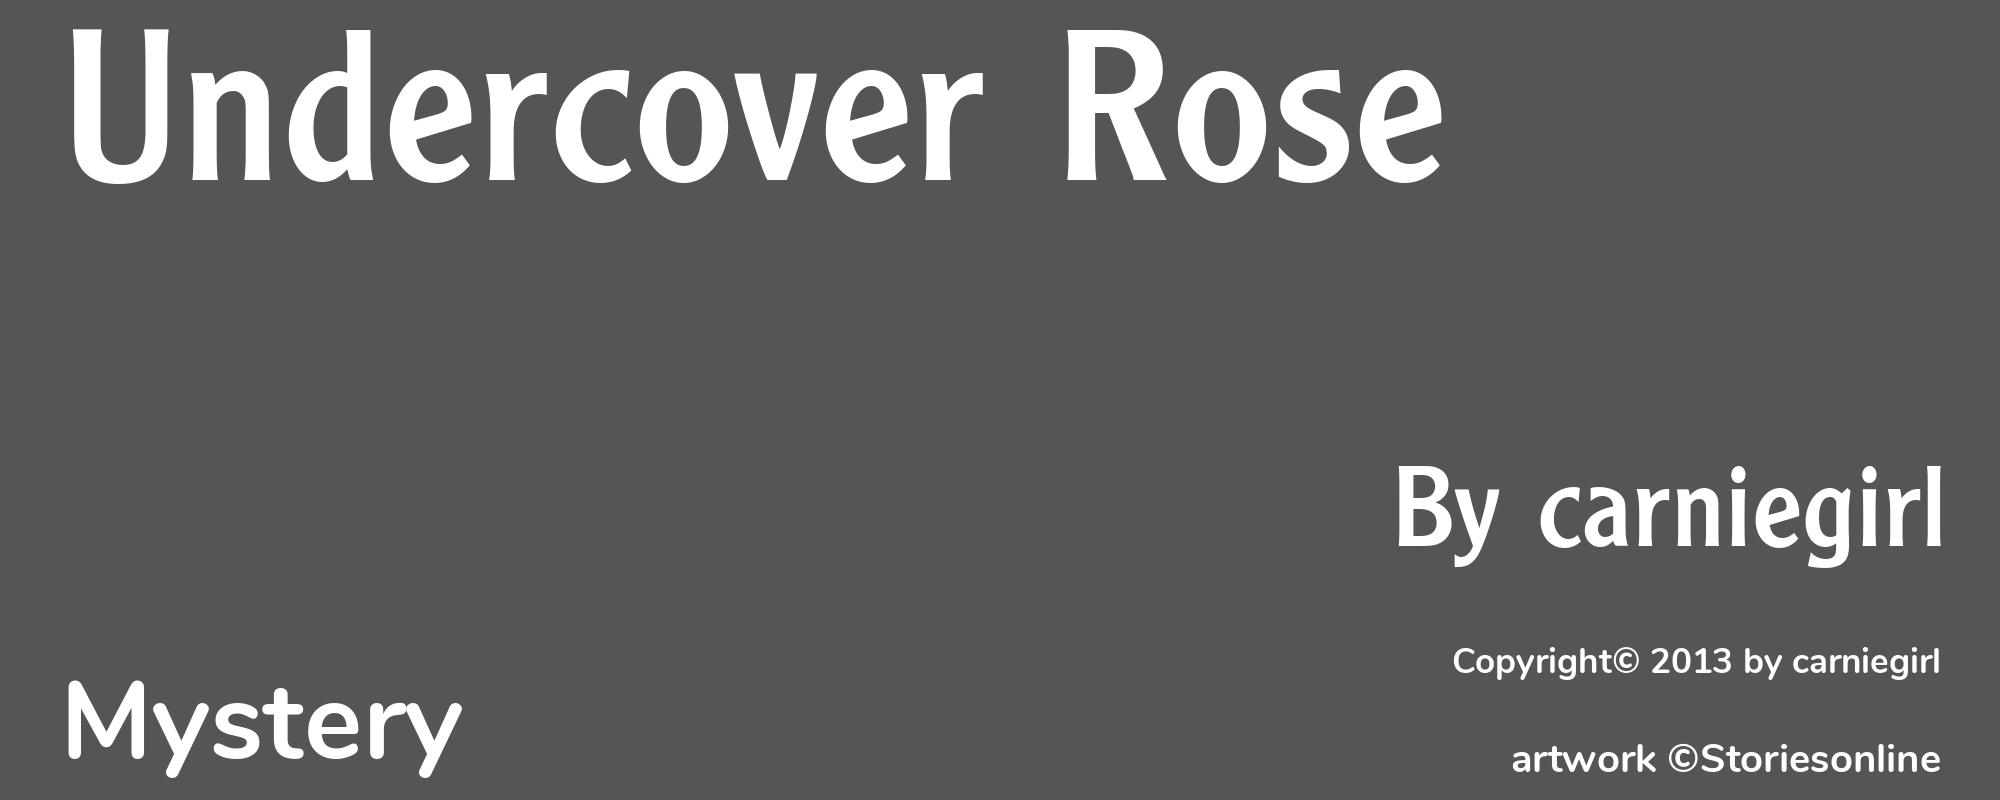 Undercover Rose - Cover